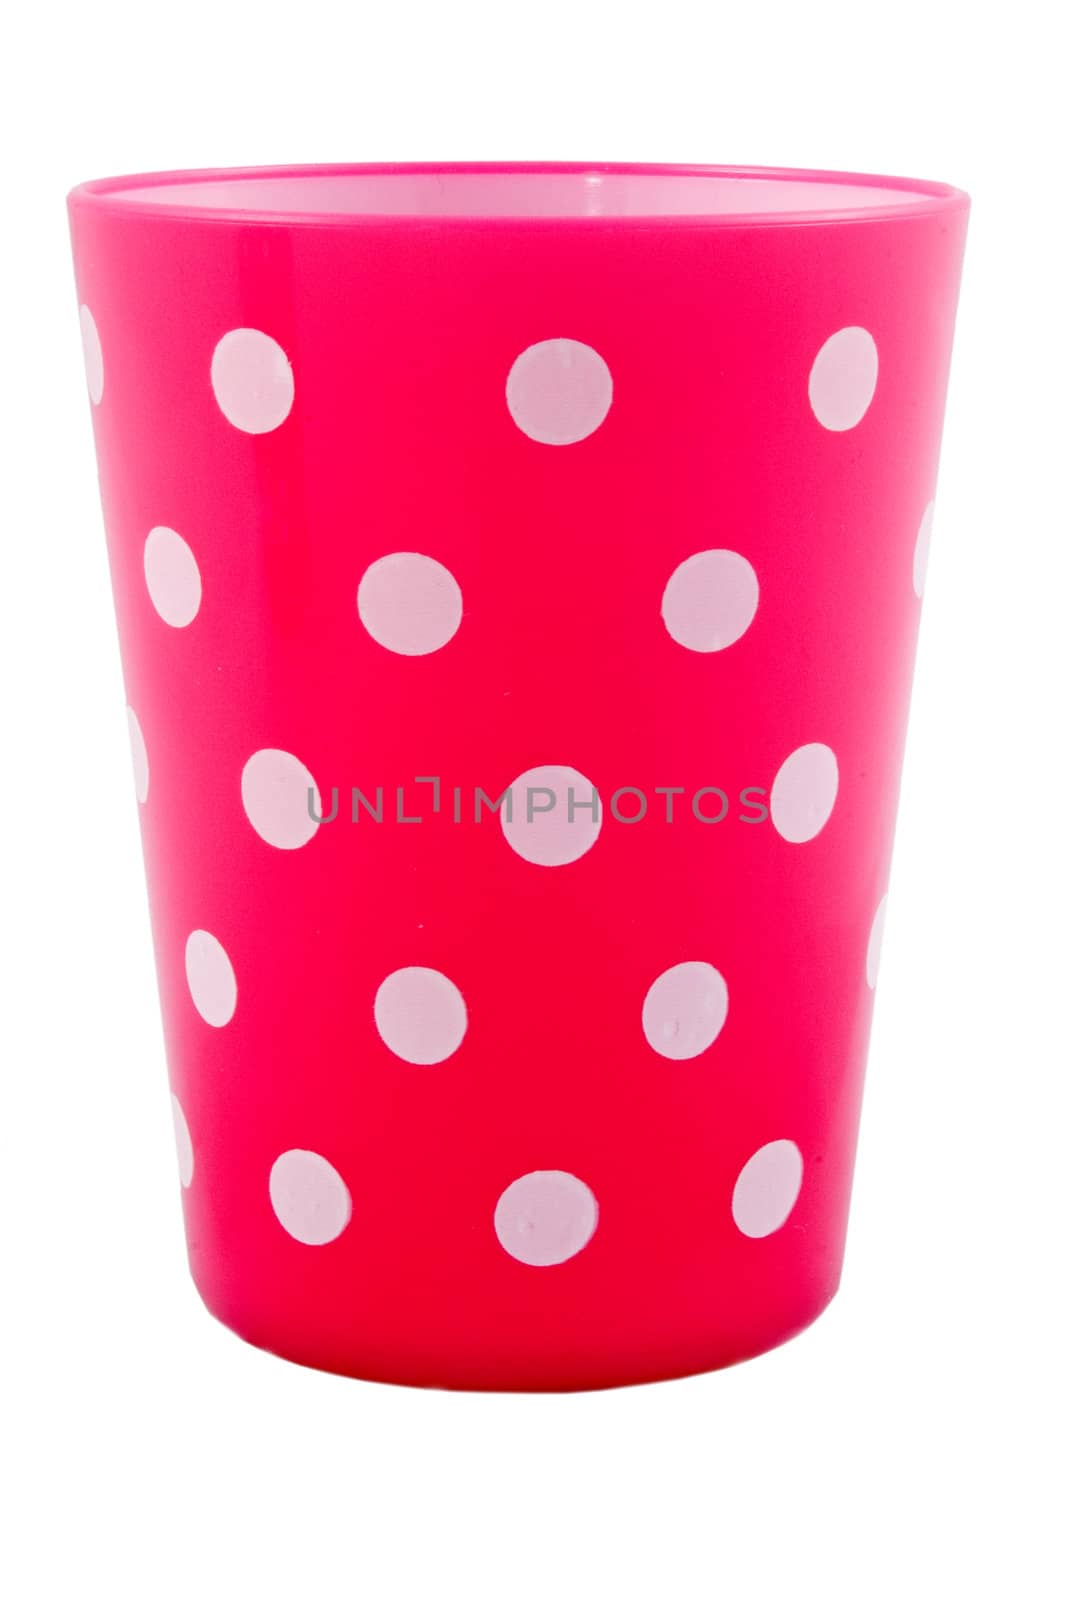 colorful pink dotted cup by ladyminnie